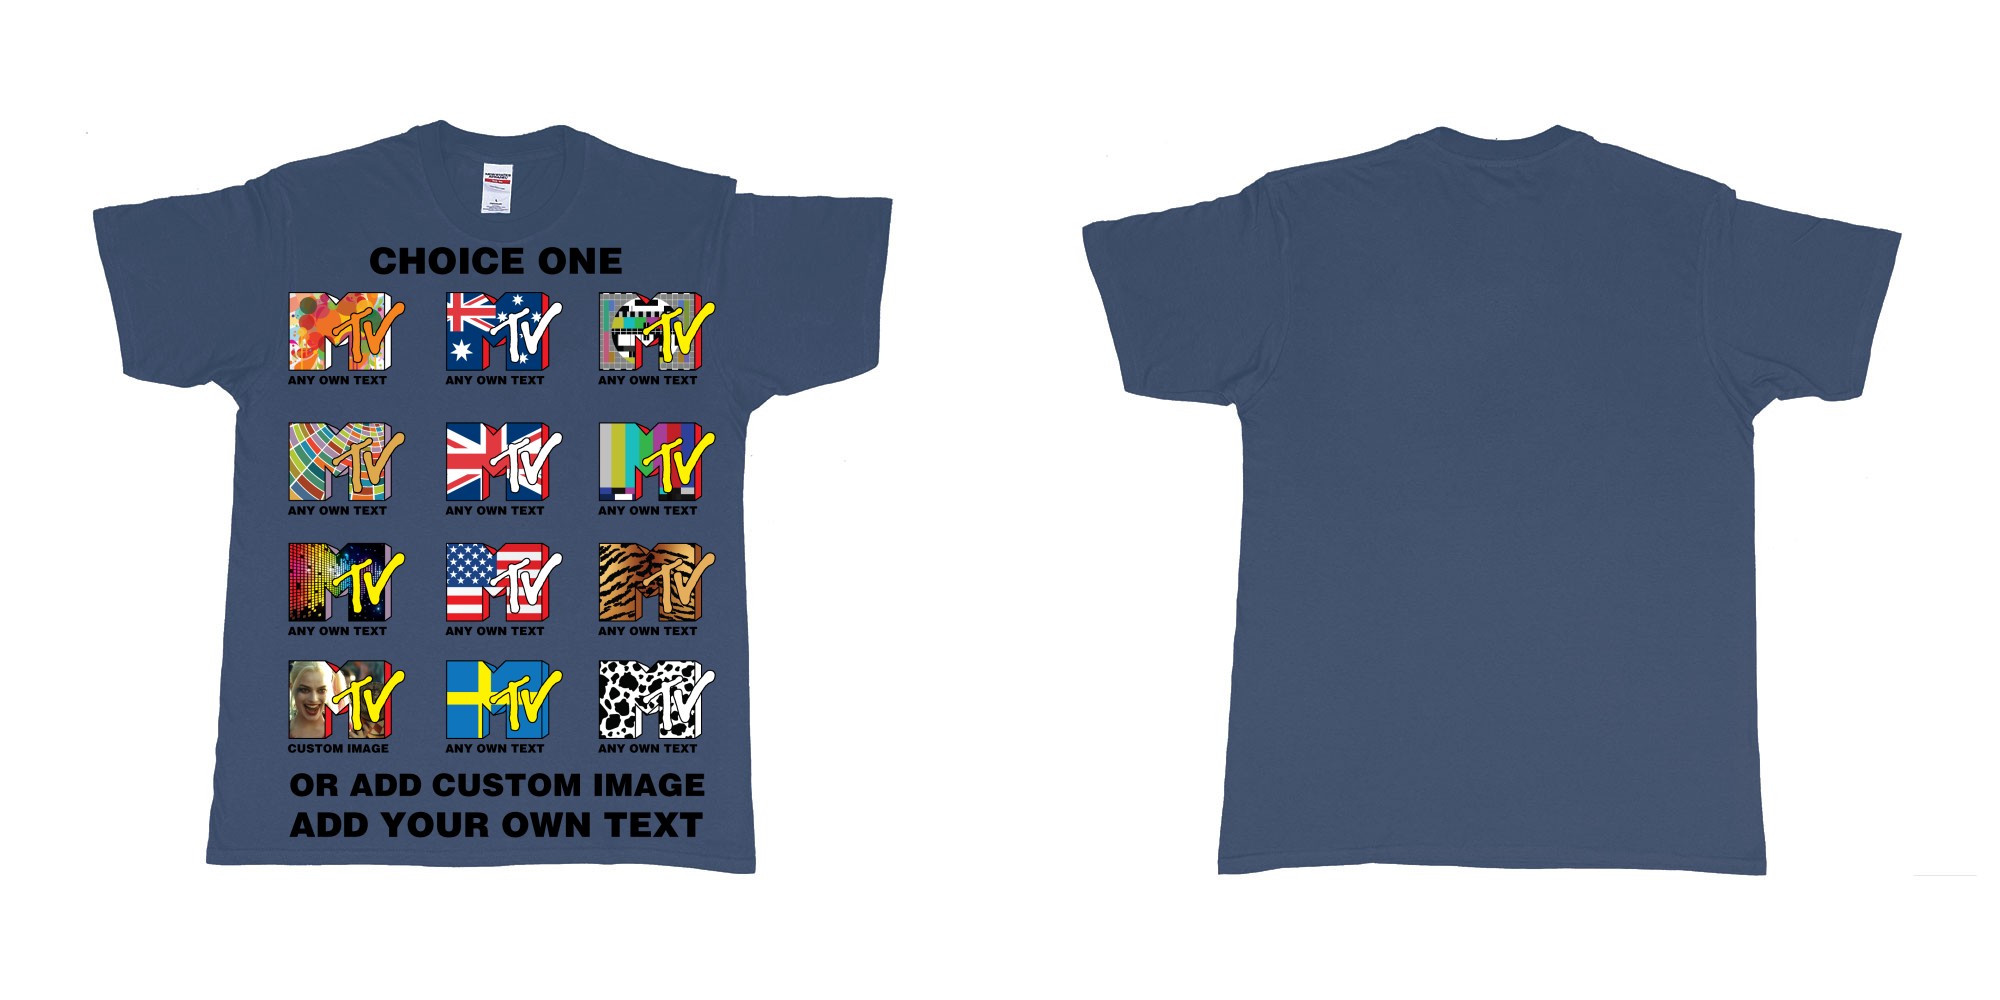 Custom tshirt design mtv logo choice any background text print in fabric color navy choice your own text made in Bali by The Pirate Way